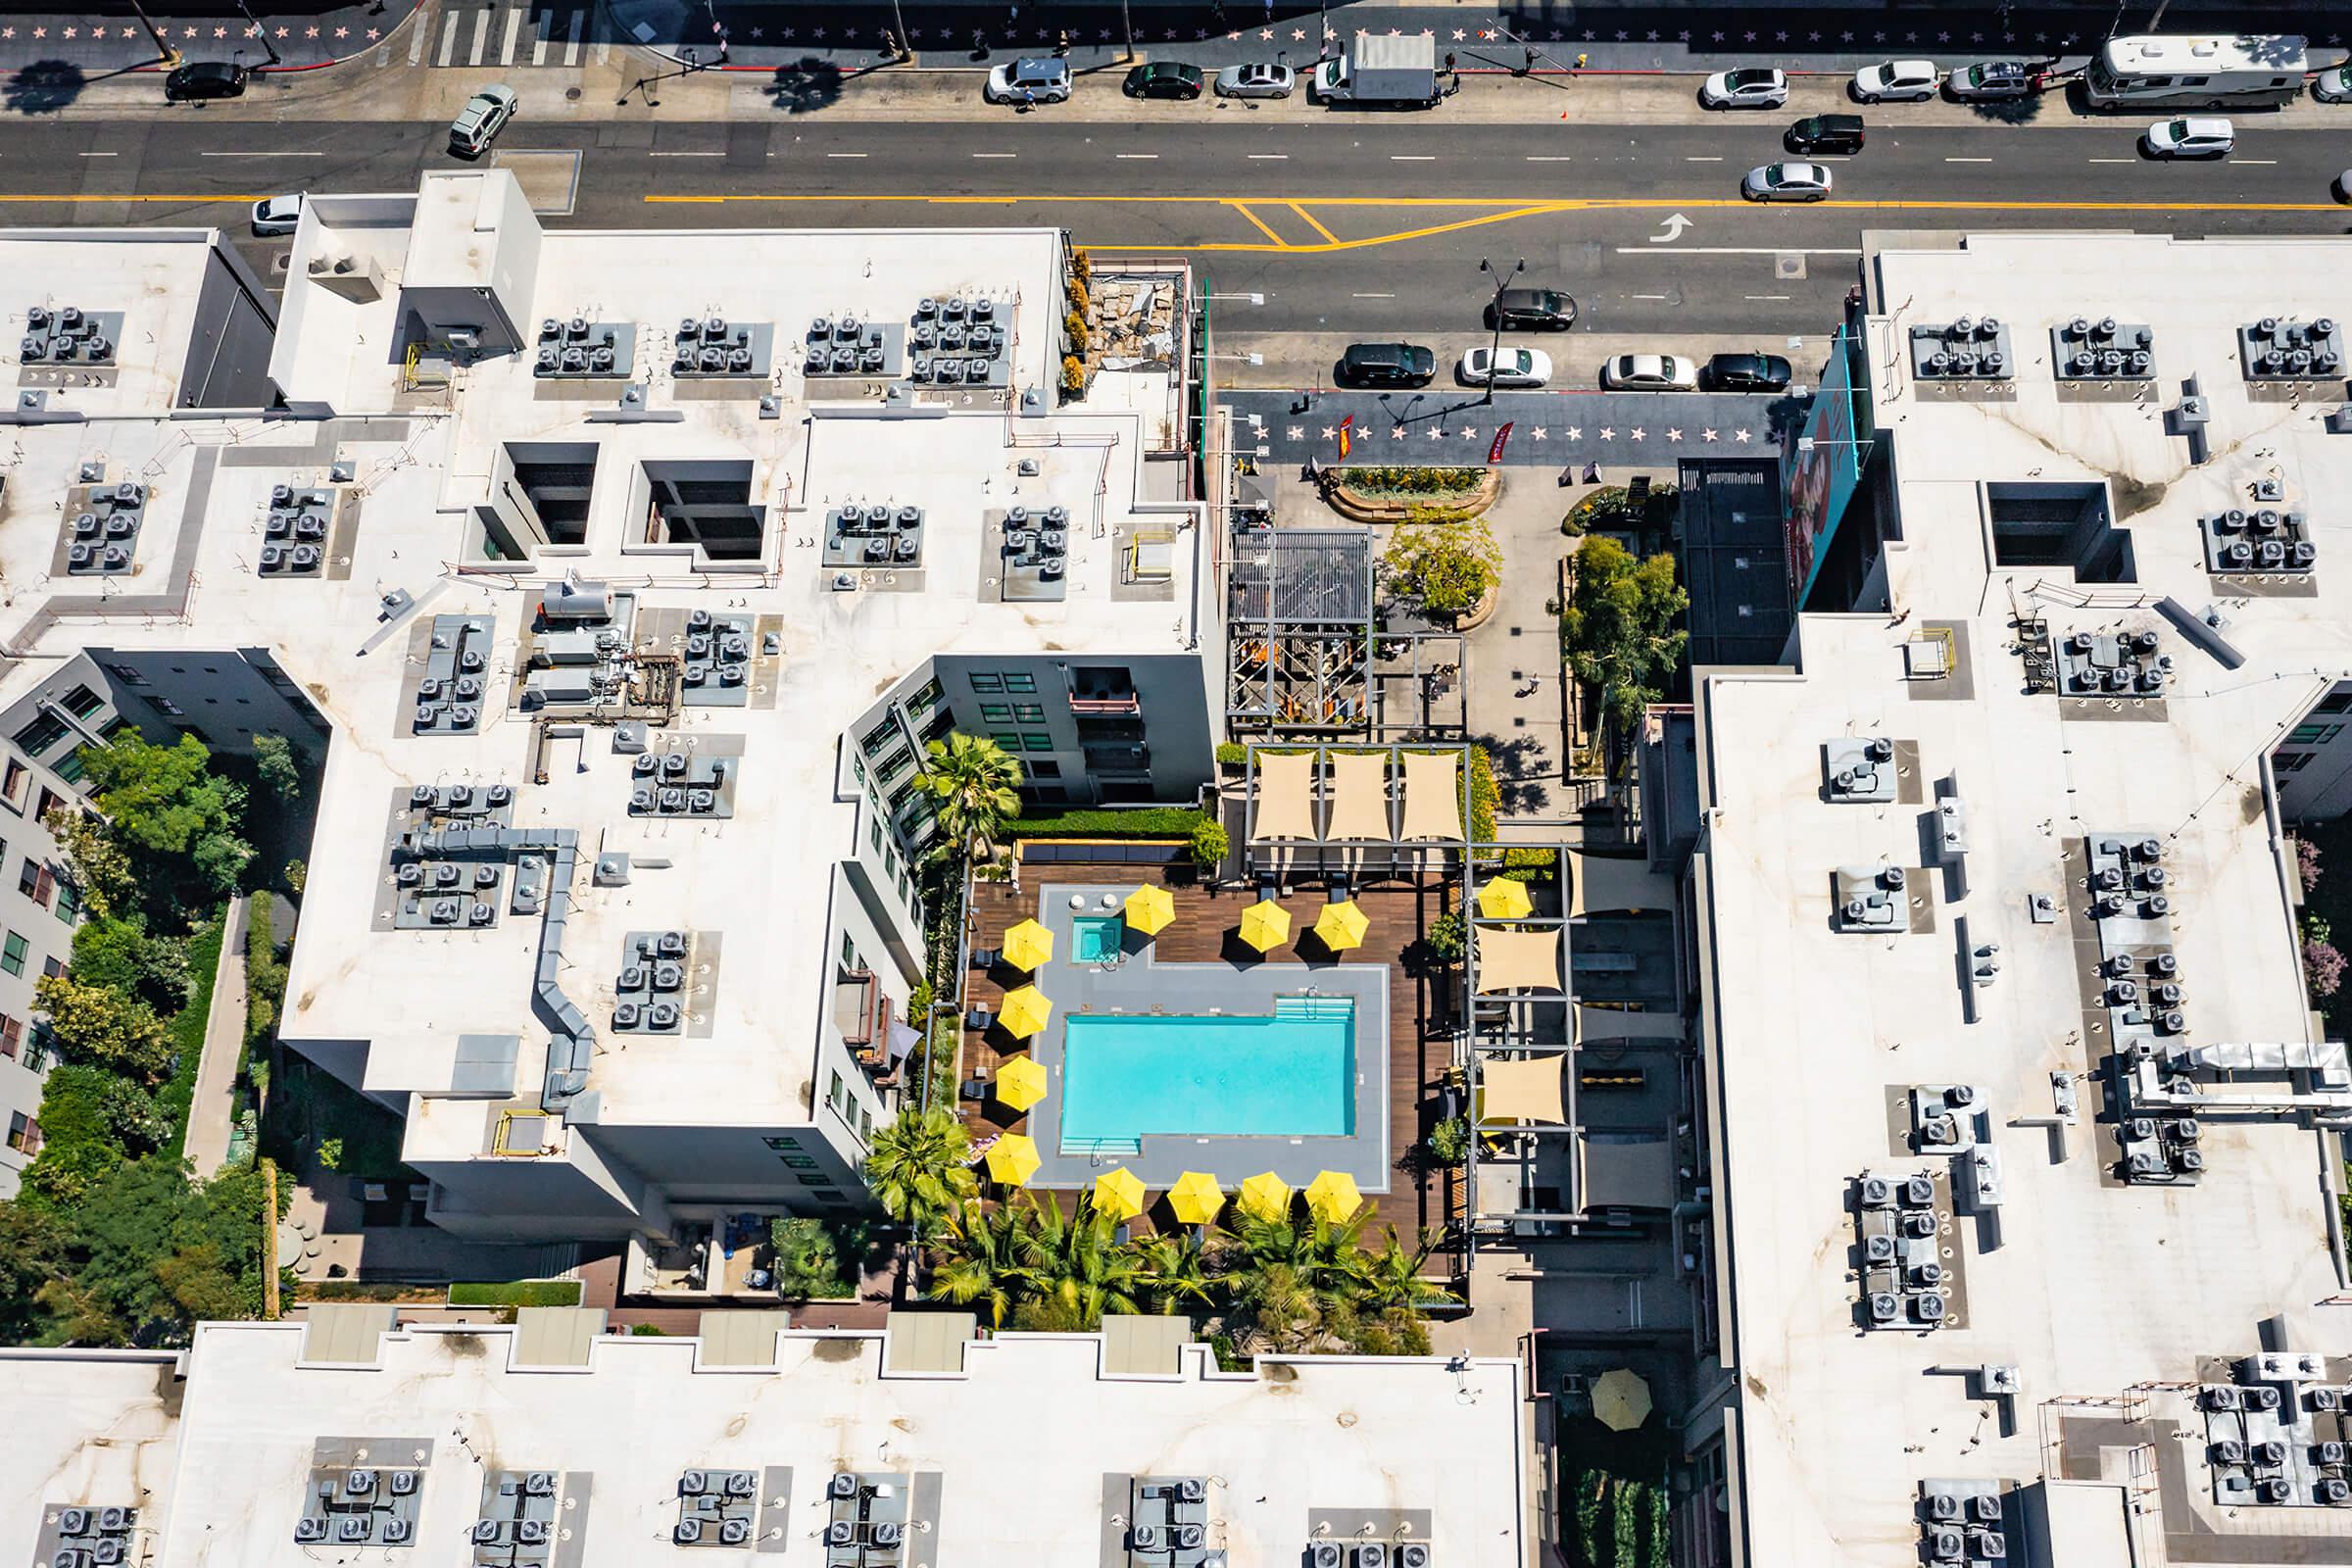 the community pool and apartment buildings from above